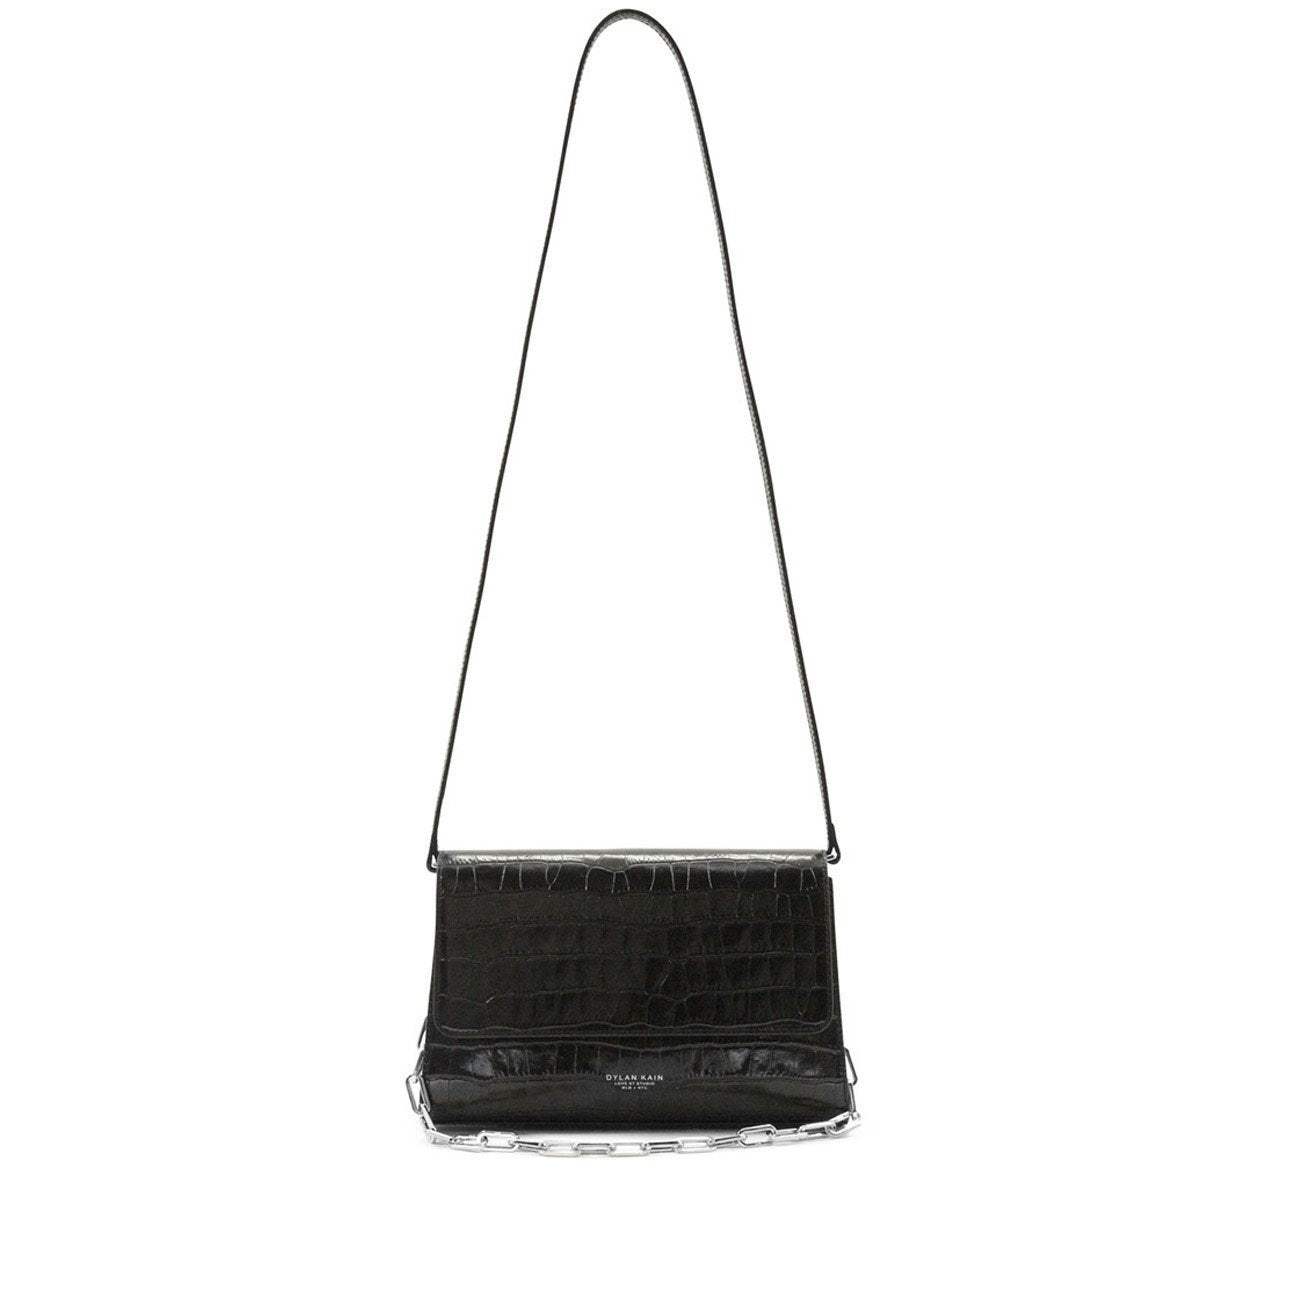 the-mathilde-bag-silver-leather-bag-chain-strap-leather-strap-dylan-kain-319938_1300x